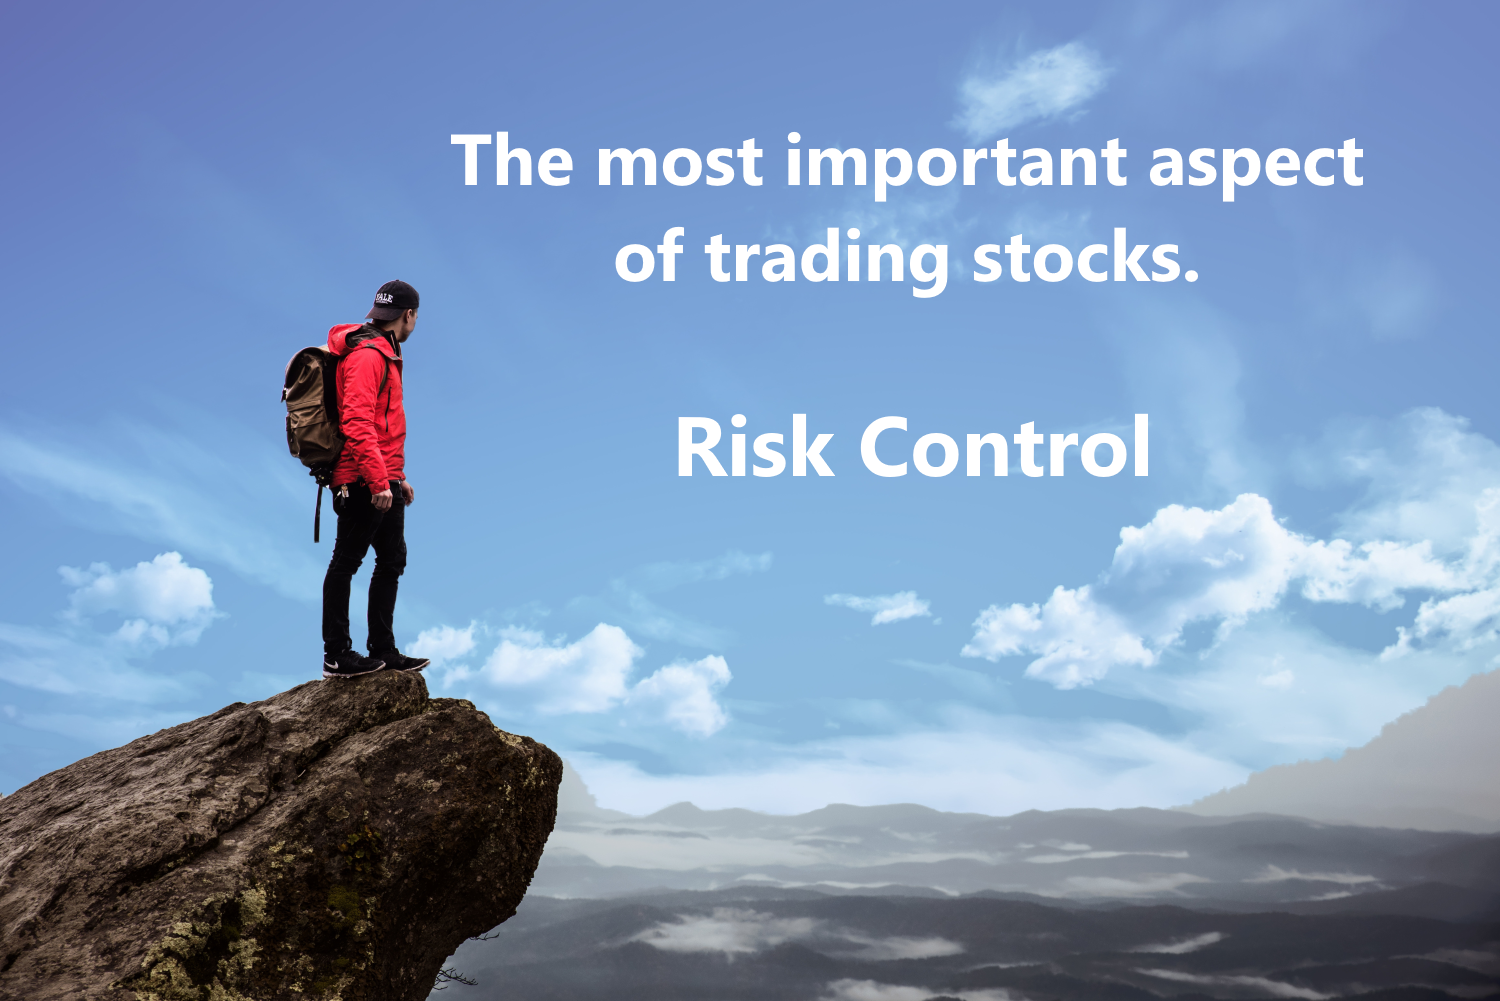 Risk Control is the single most important factor in successful online stock trading.